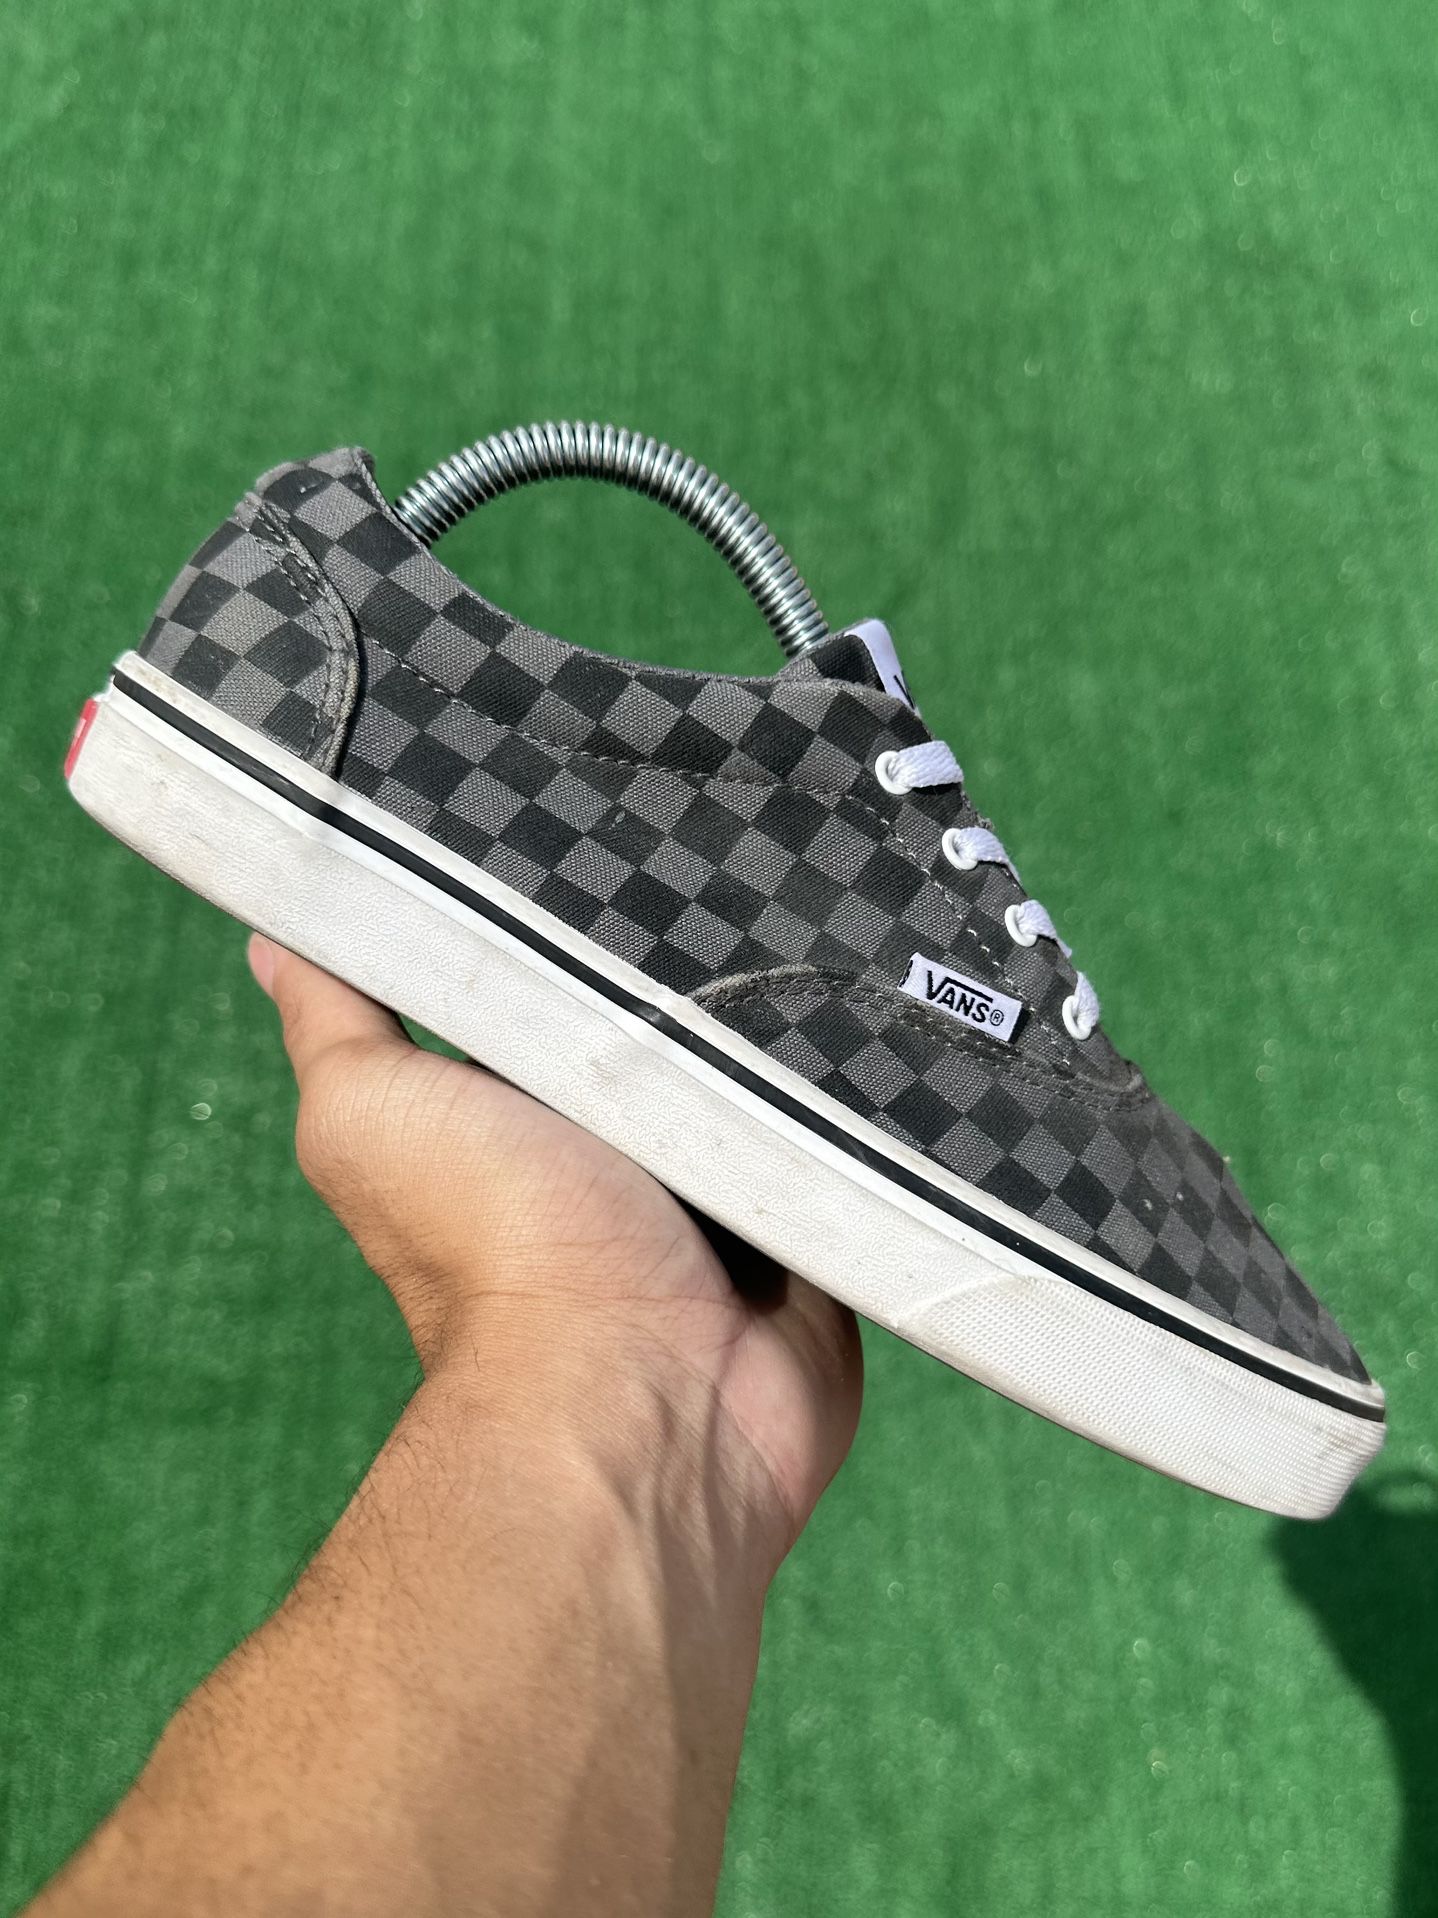 VANS DOHENY “GREY CHECKERBOARD” (Size 7, Youth)